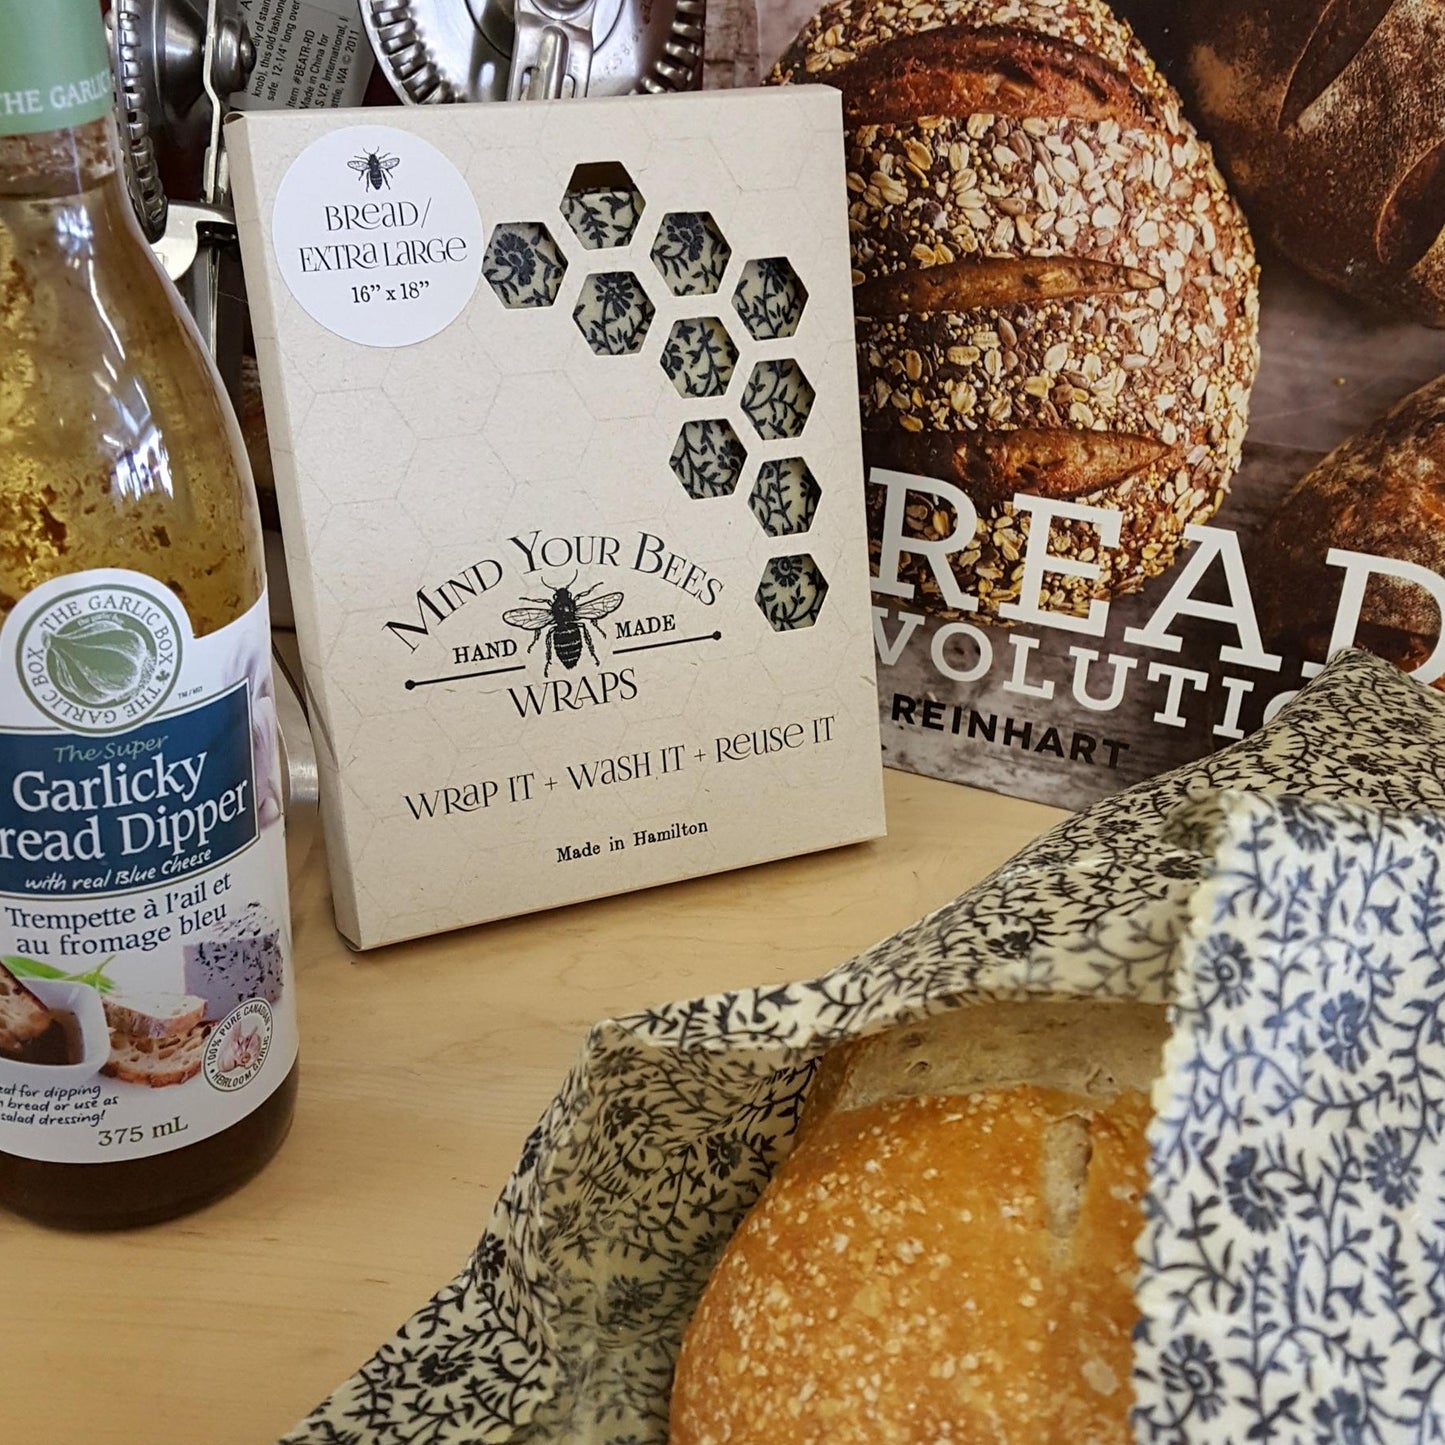 Extra large Mind Your Bees Bread Wrap, recipe book and bread dip